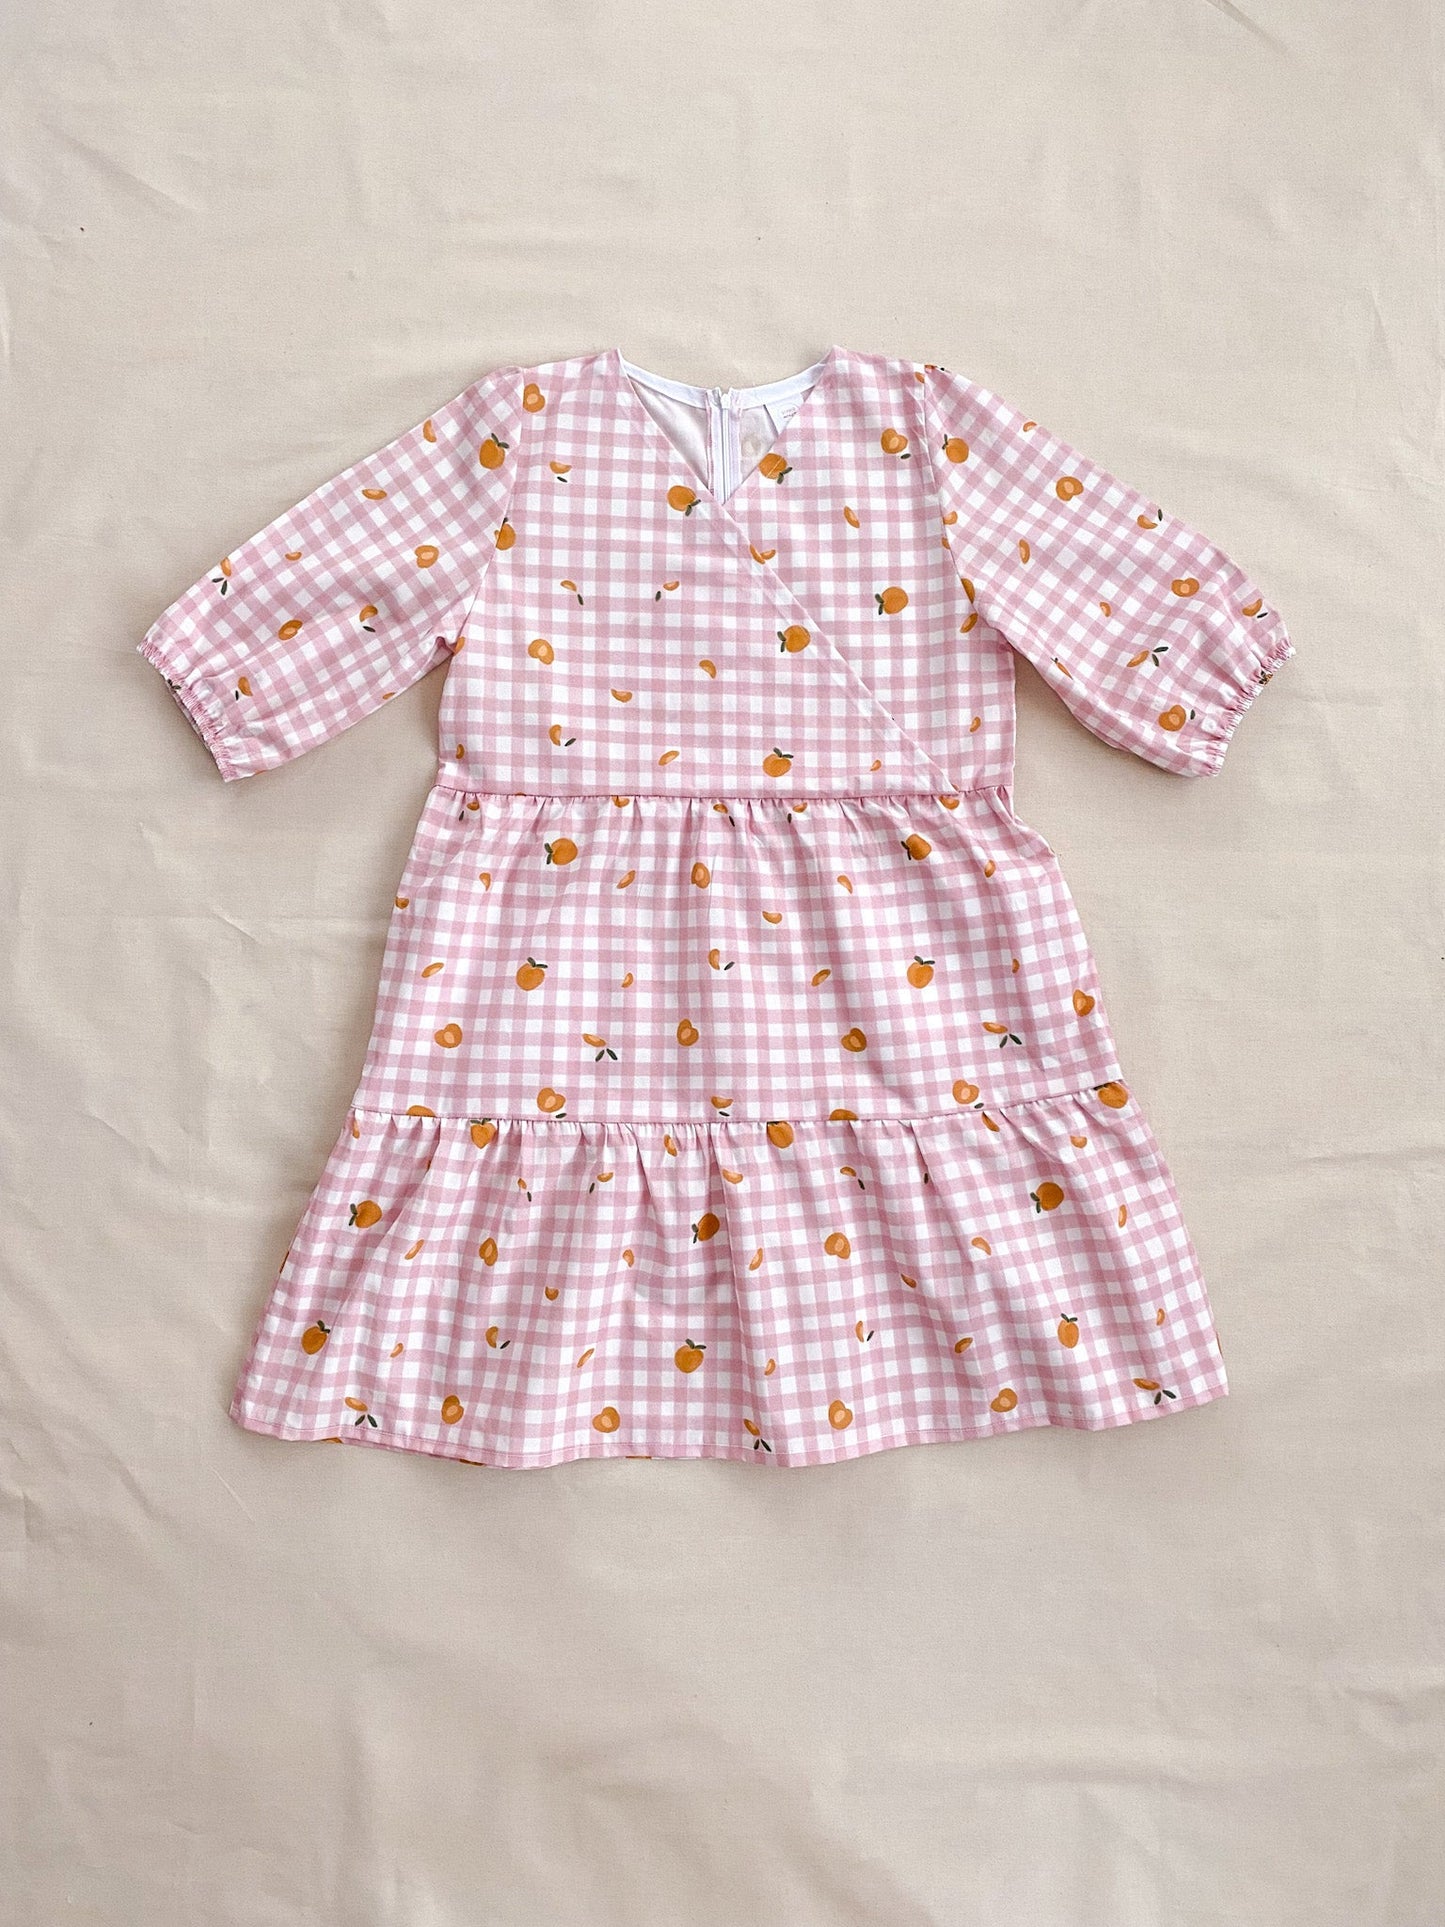 Maple dress in apricot picnic - size S